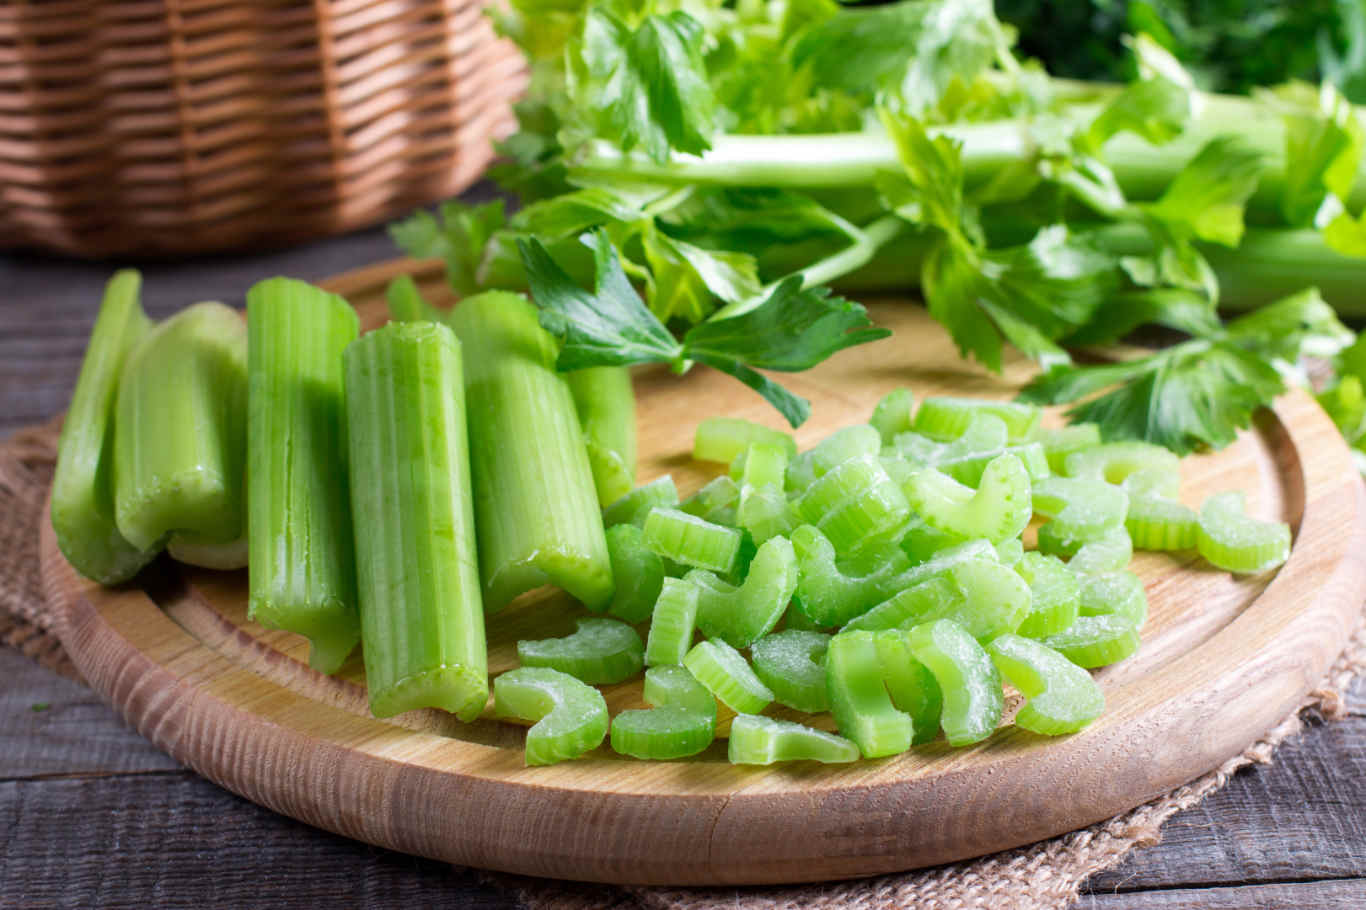 If You Like 22 of 30 Things Then You Definitely Have We… Quiz Celery